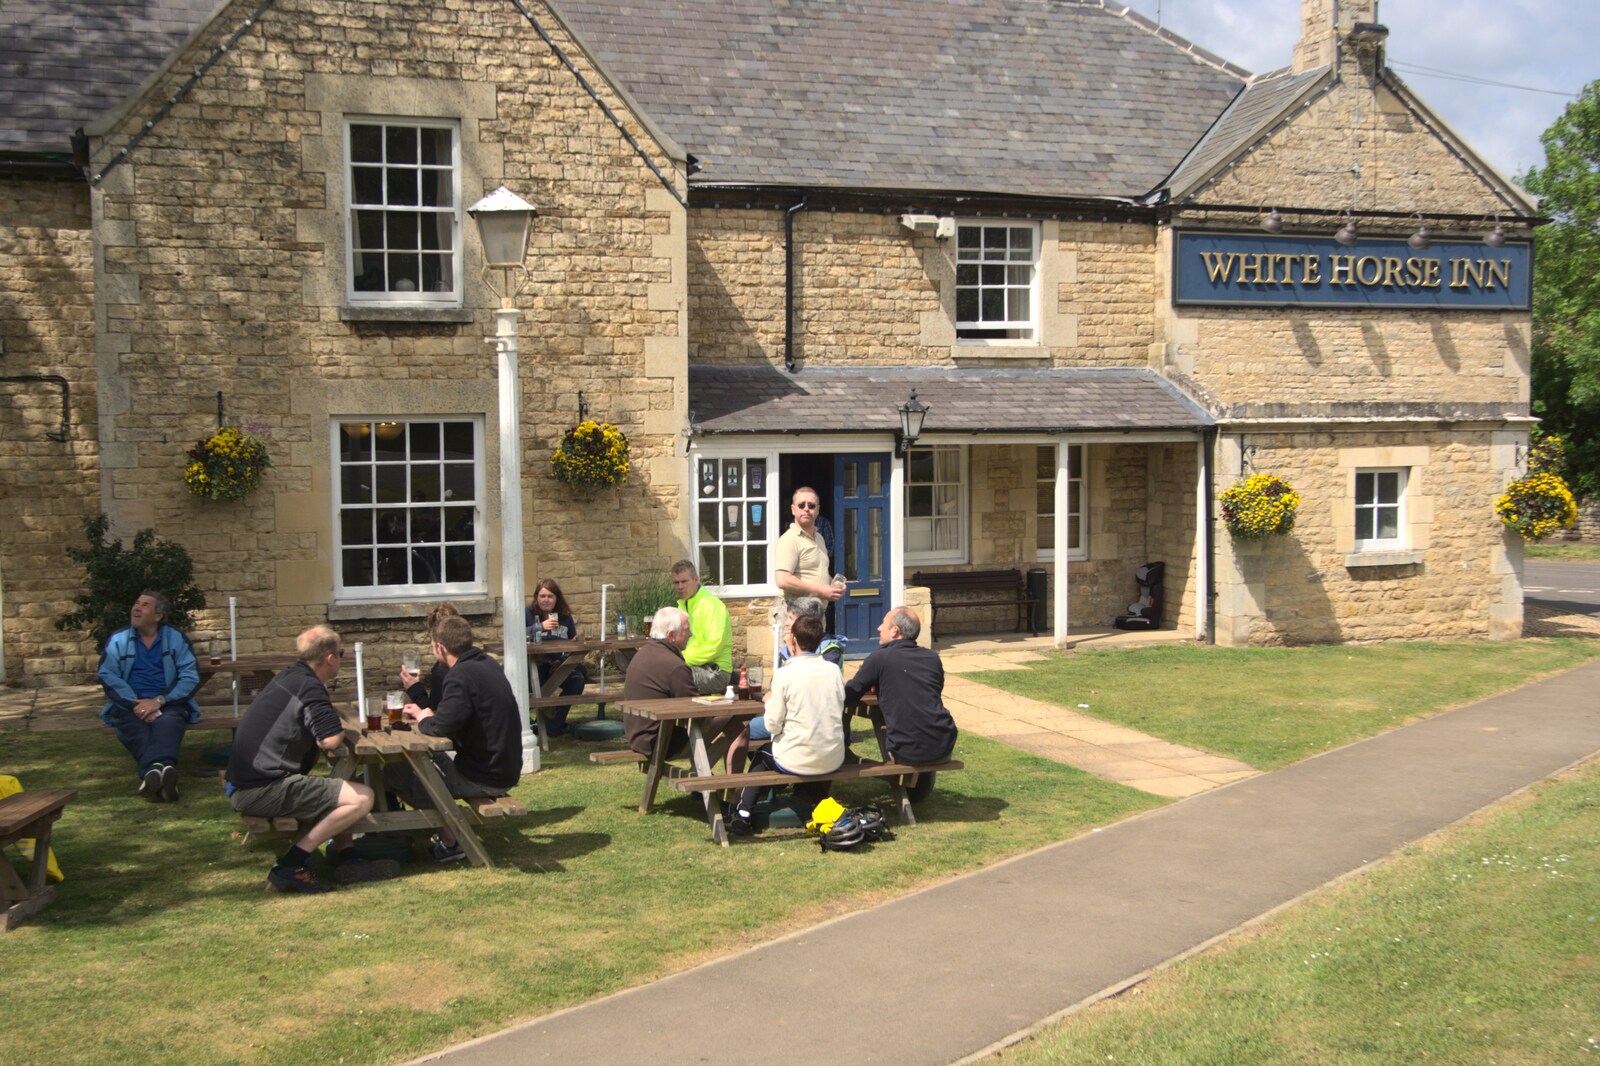 The BSCC in the White Horse beer garden from The BSCC Weekend at Rutland Water, Empingham, Rutland - 14th May 2011